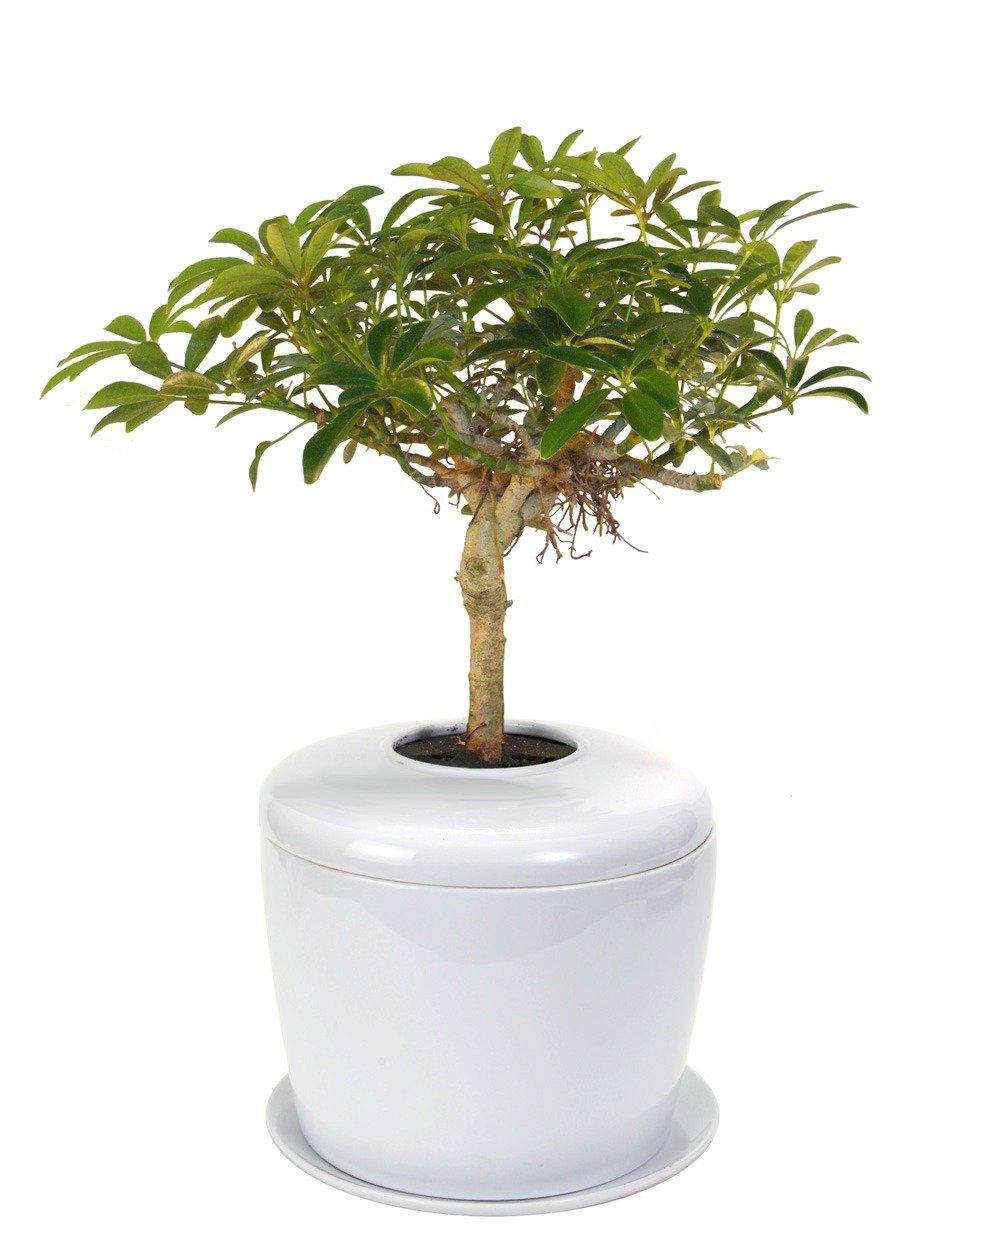 The Living Urn Indoors / Patio - SereniCare